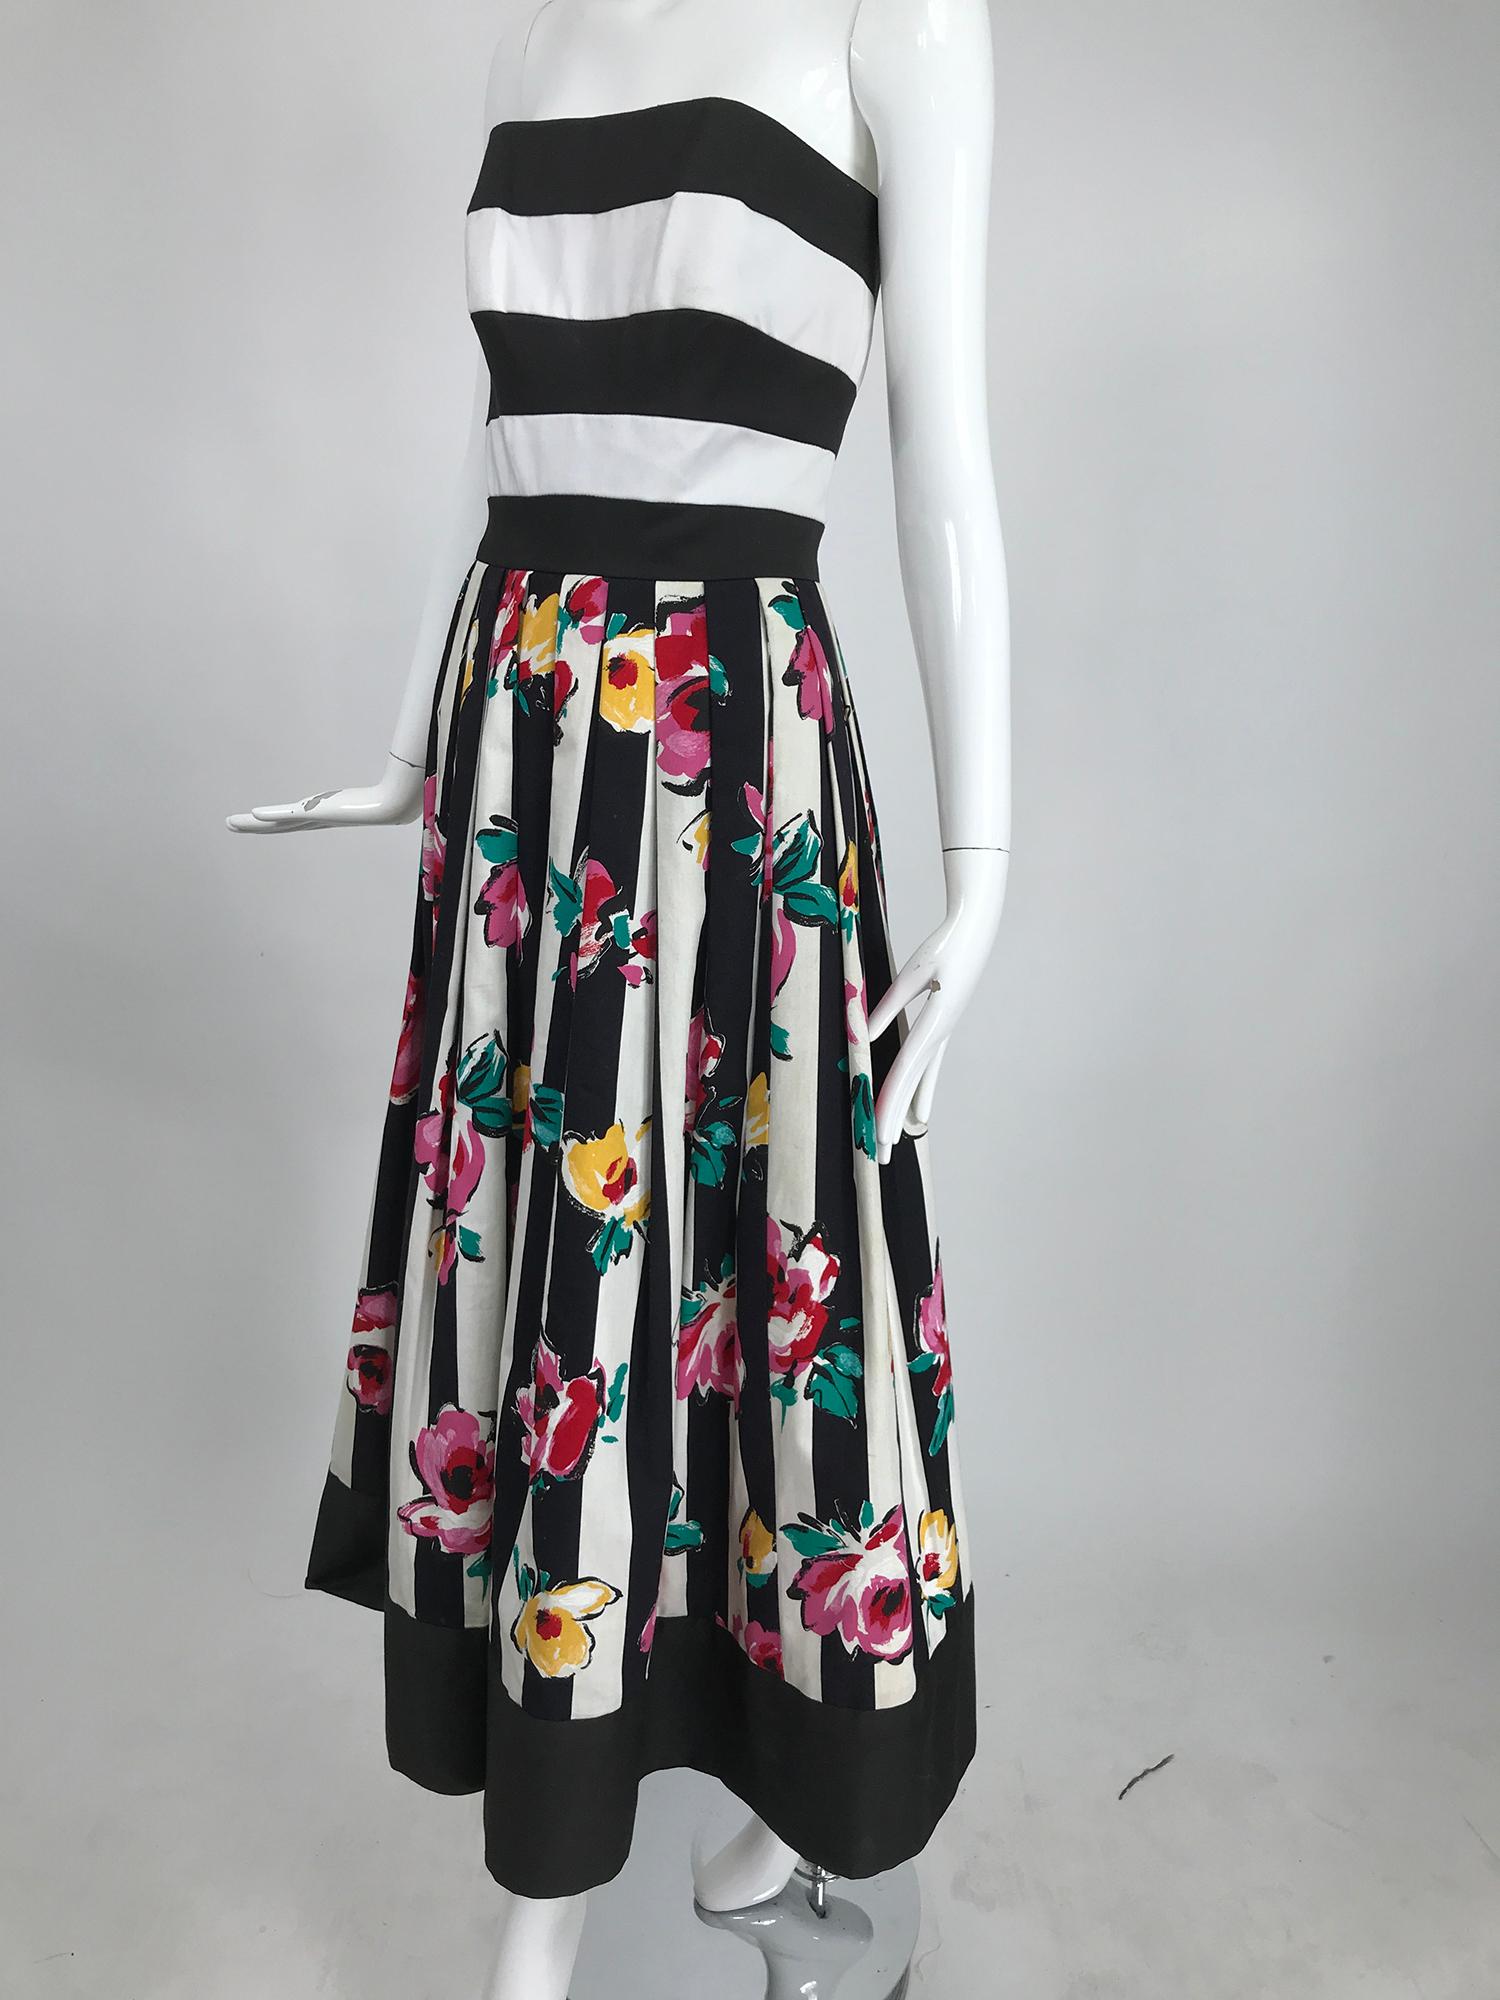 Victor Costa strapless black and white stripe floral fit and flare dress from the 1990s. This beautiufl dress is so bright and cheerful, the combination of the bold black and white stripes of the bodice and the blazing flowers on the skirt is